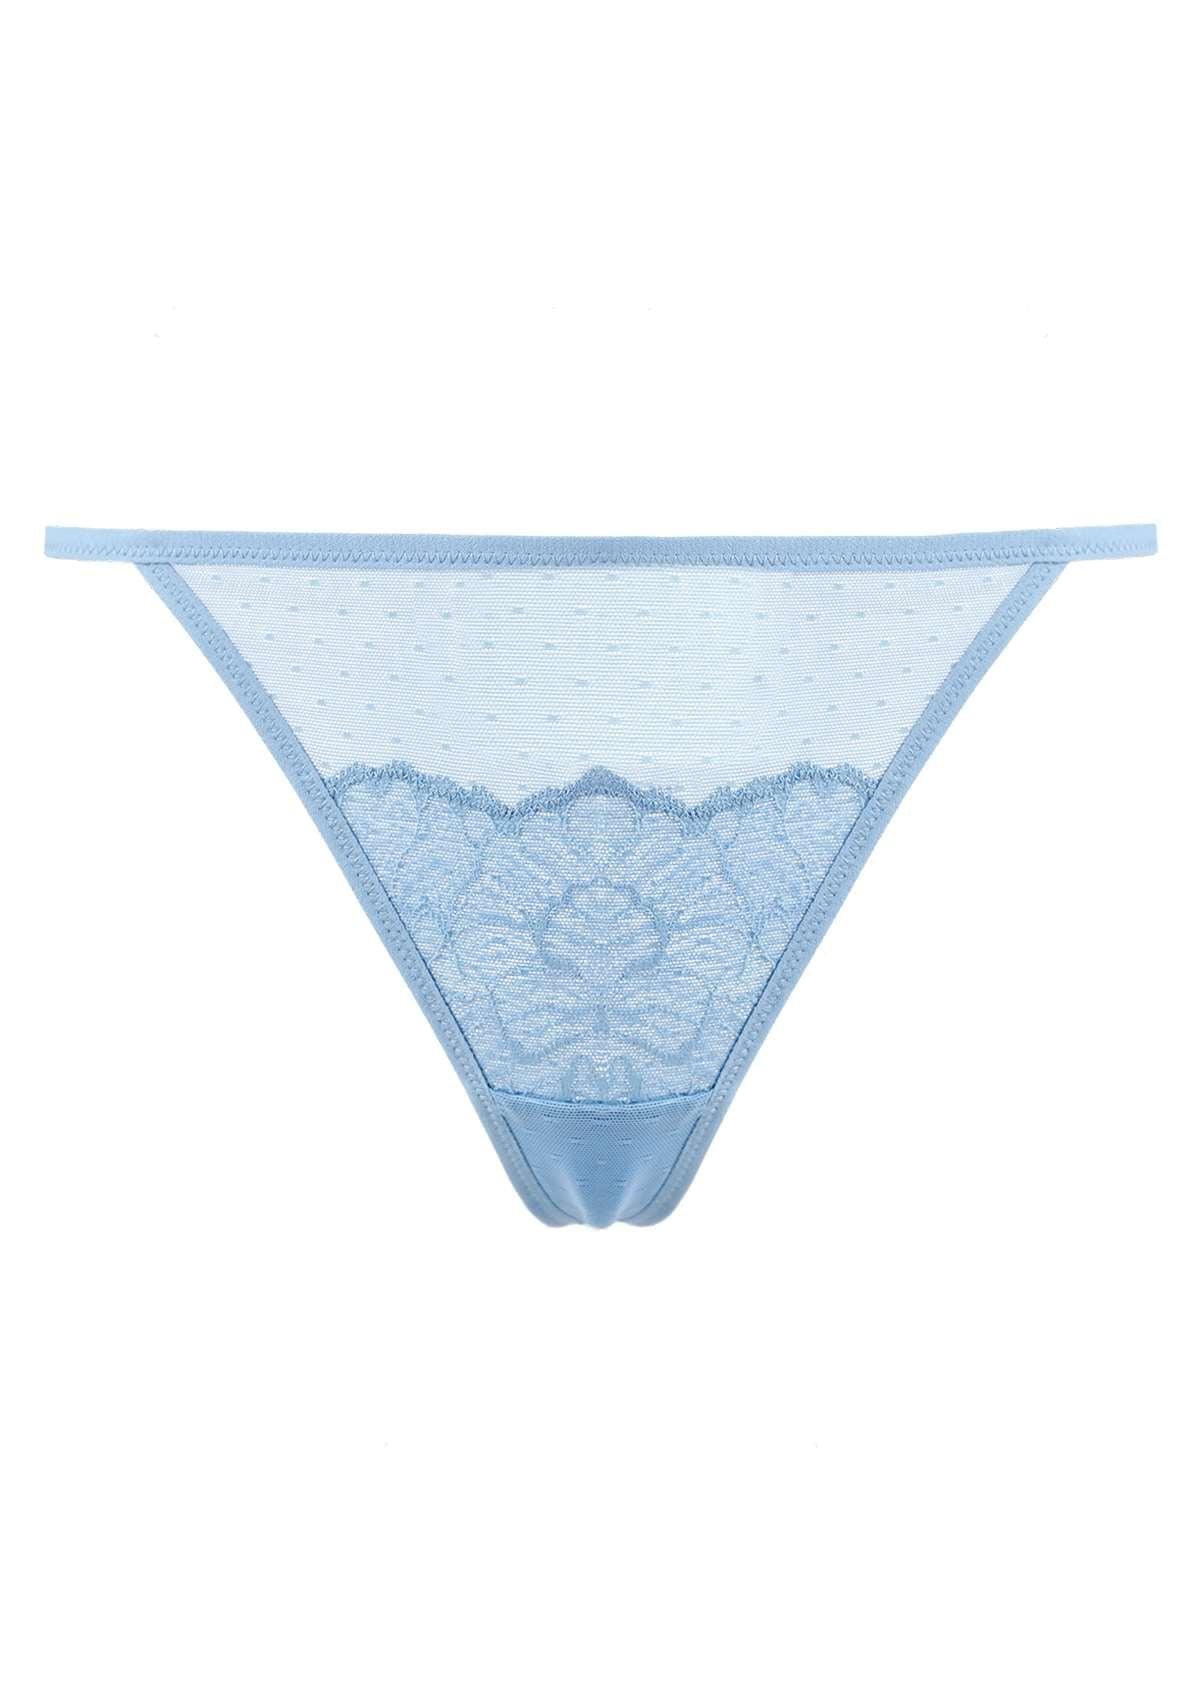 HSIA Blossom Floral Lace Mesh Cheeky Sexy String Thongs - 3 Pack - S / Storm Blue+Dark Pink+Black